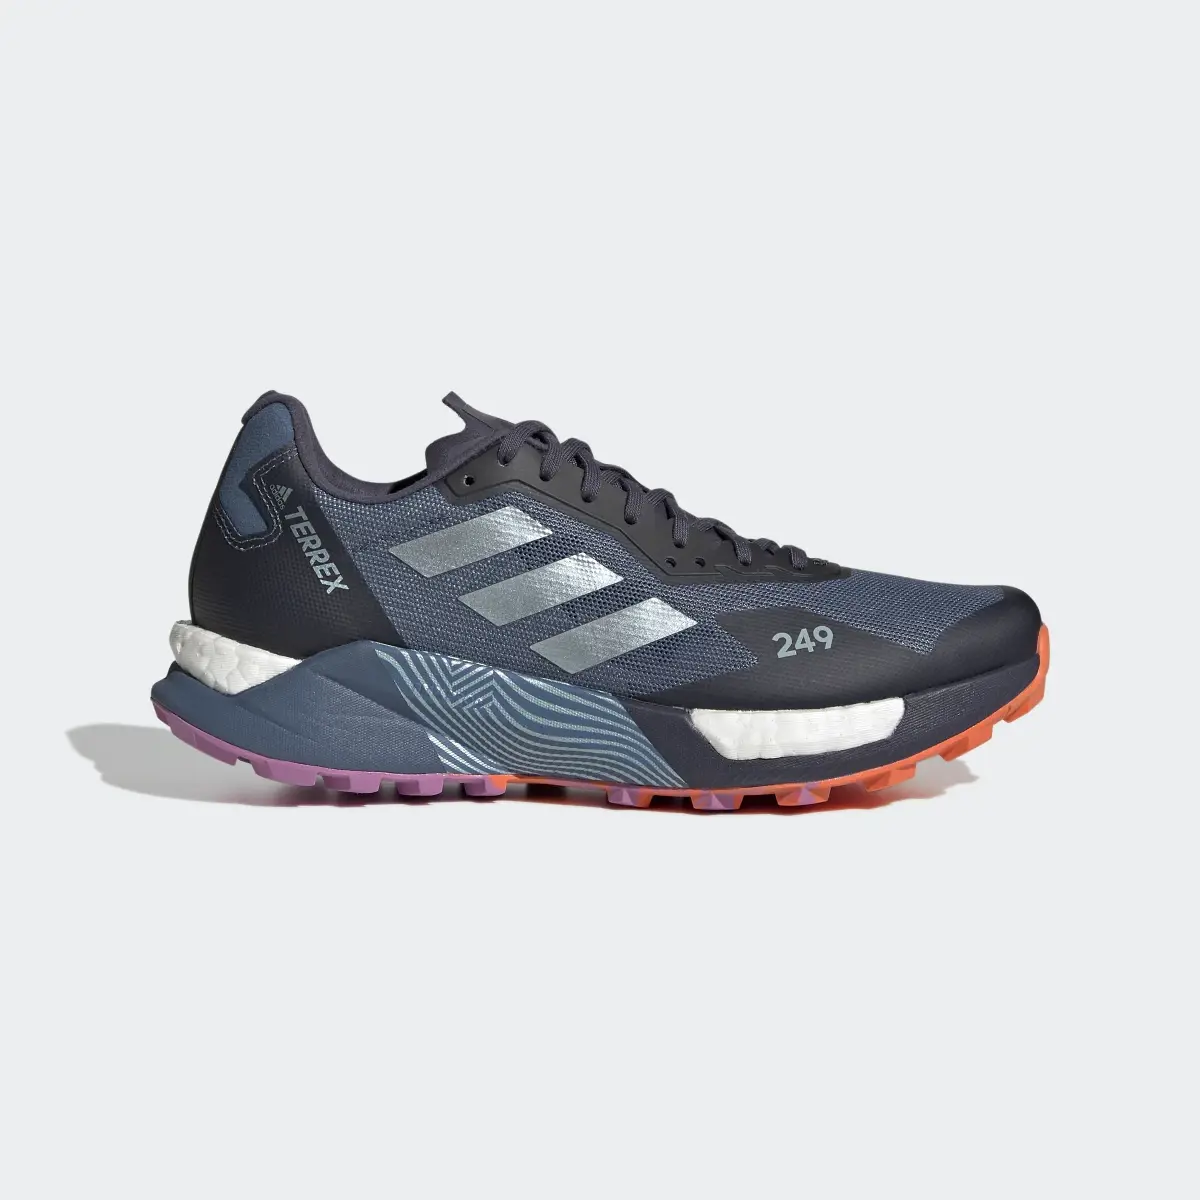 Adidas Terrex Agravic Ultra Trail Running Shoes. 2